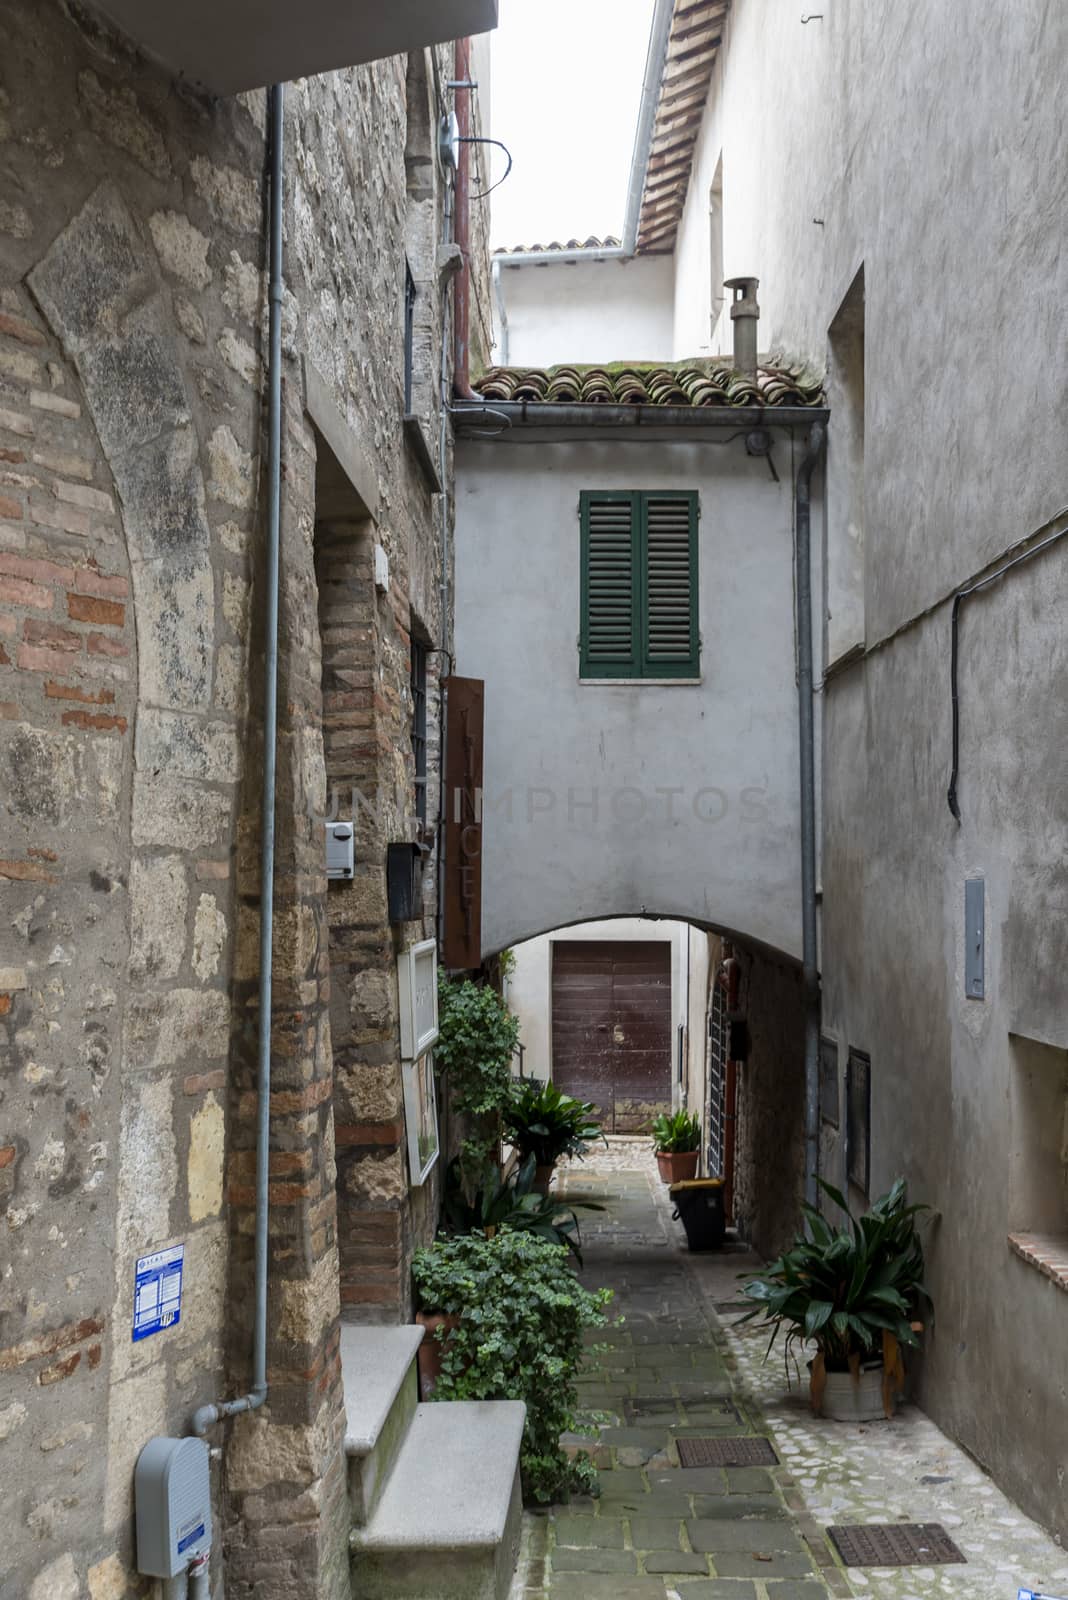 acquasparta,italy september 21 2020:architecture of alleys and buildings in the town of Acquasparta